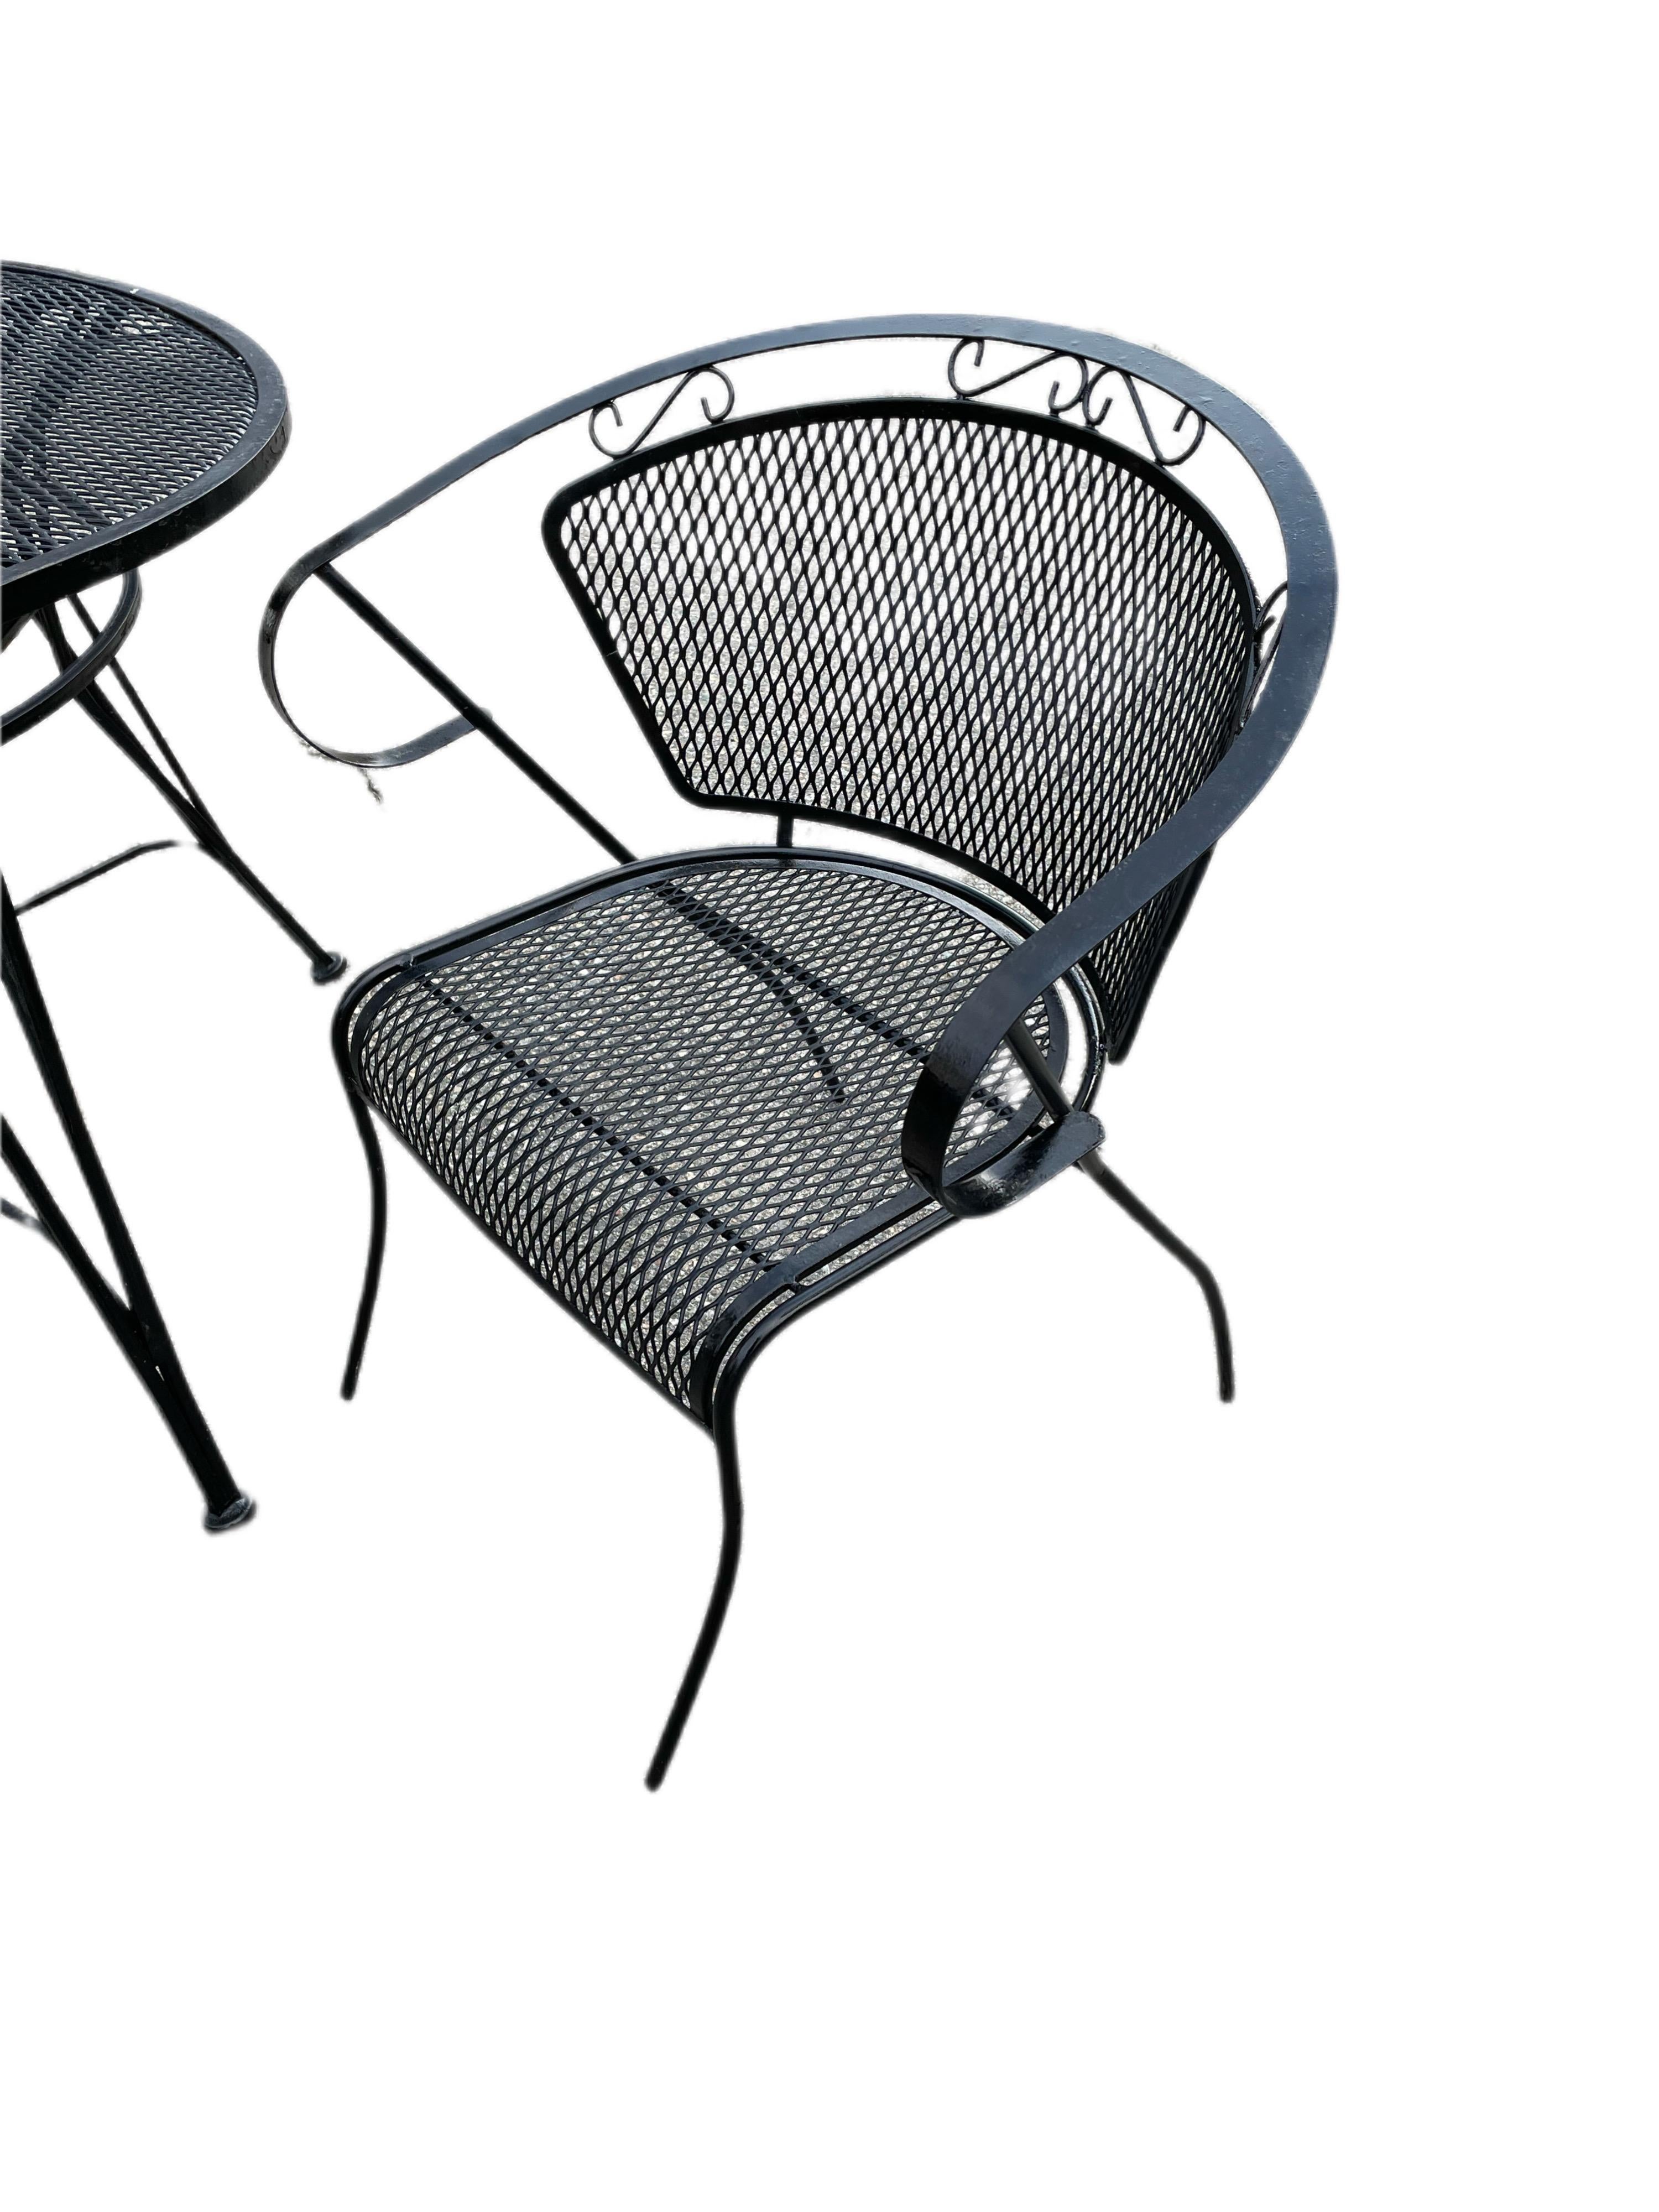 wrought iron barrel chairs